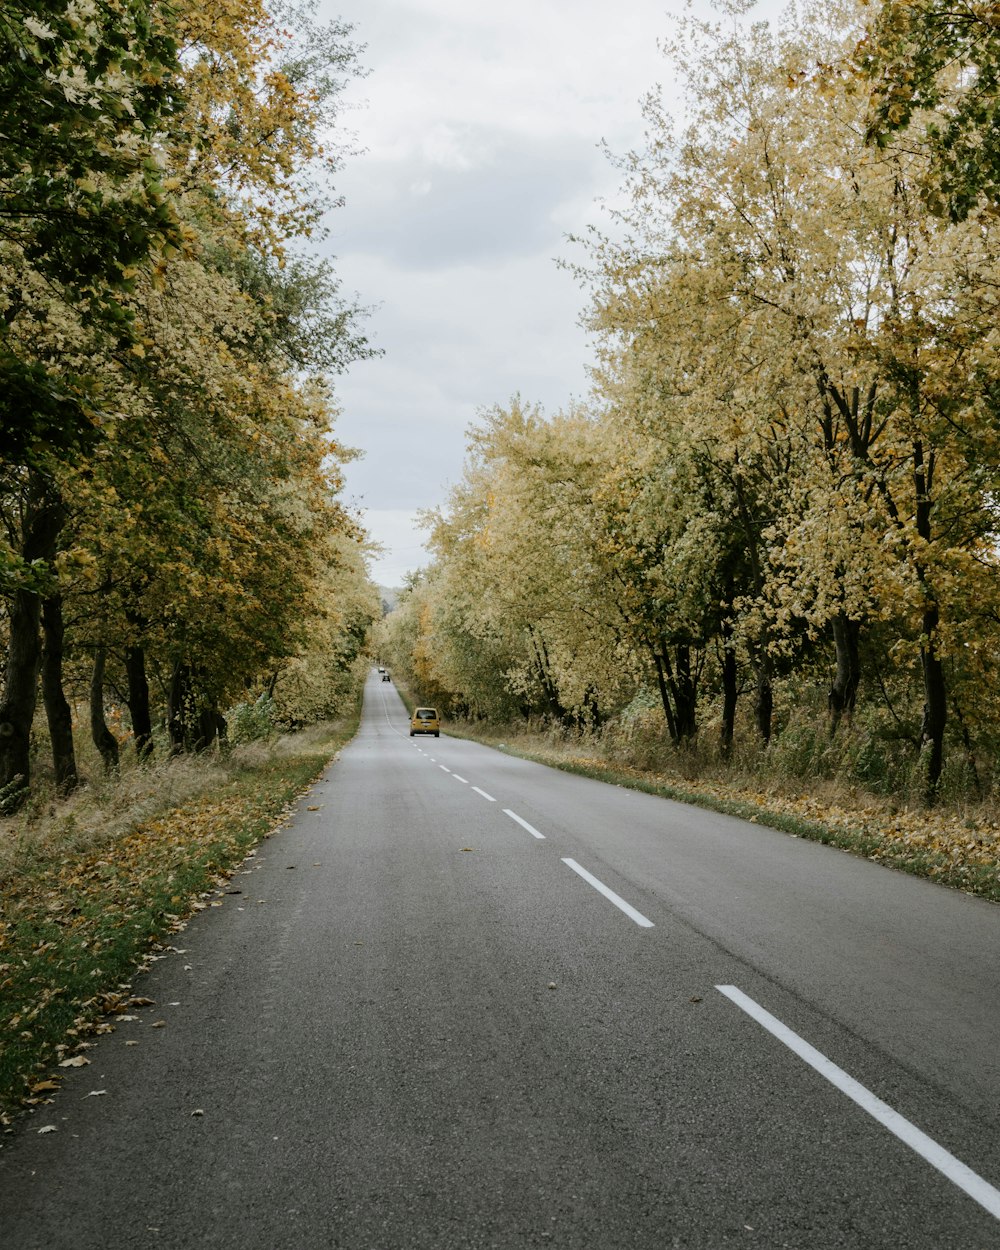 an empty road surrounded by trees with yellow leaves